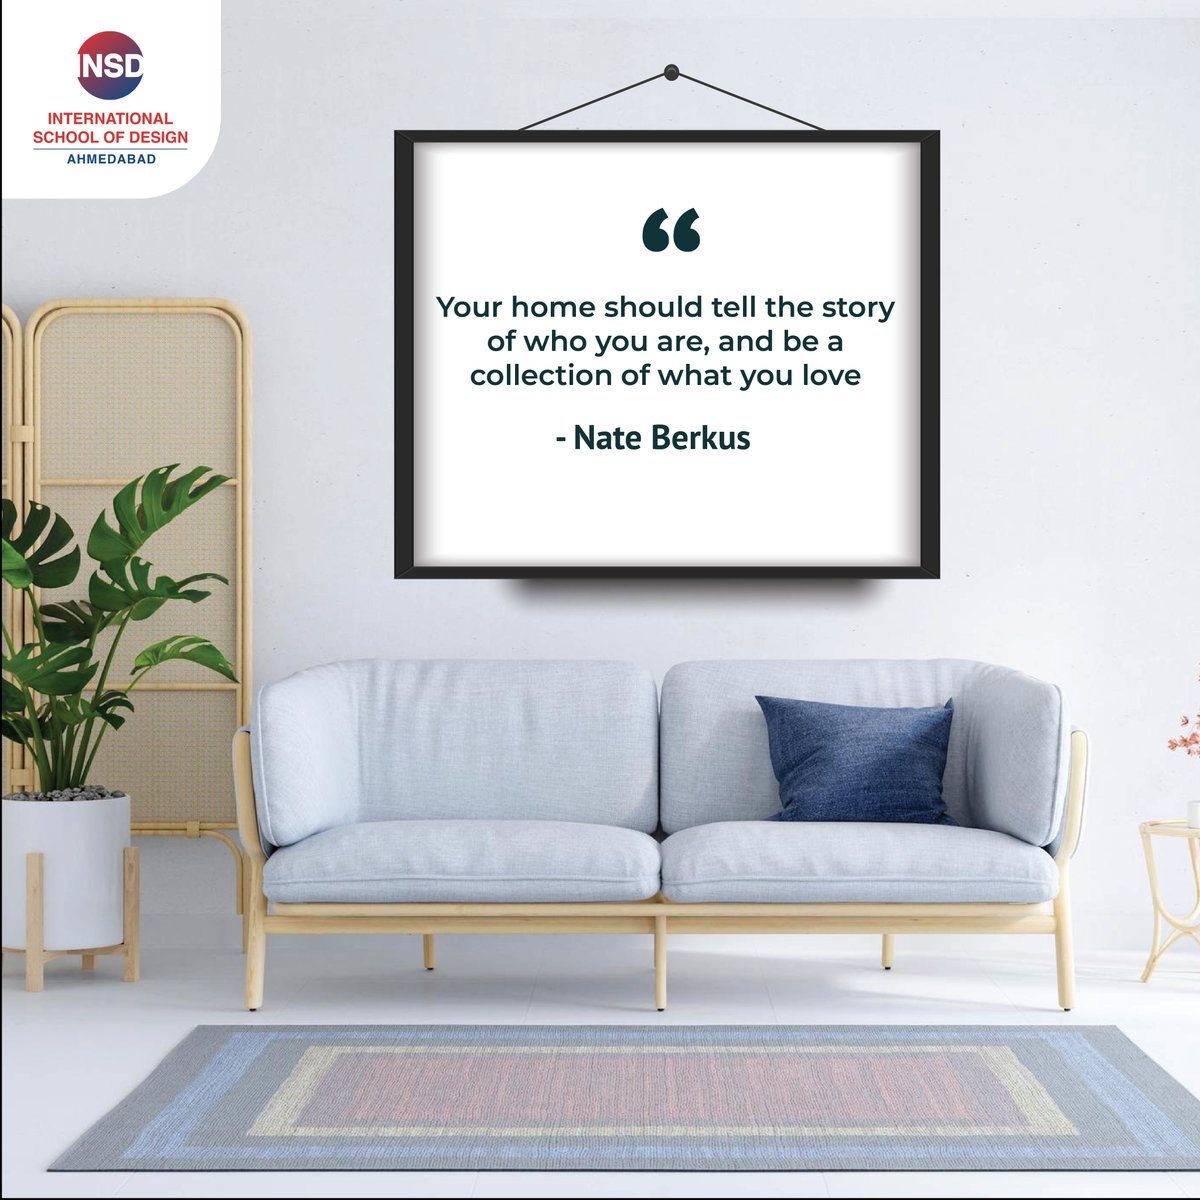 'Your home should tell the story of who you are, and be a collection of what you love.' - Nate Berkus #insdahmedabad #quoteoftheday #nateberkus #interiordesignquotes #interiordesign #interiordesignideas #interiordesigninspiration